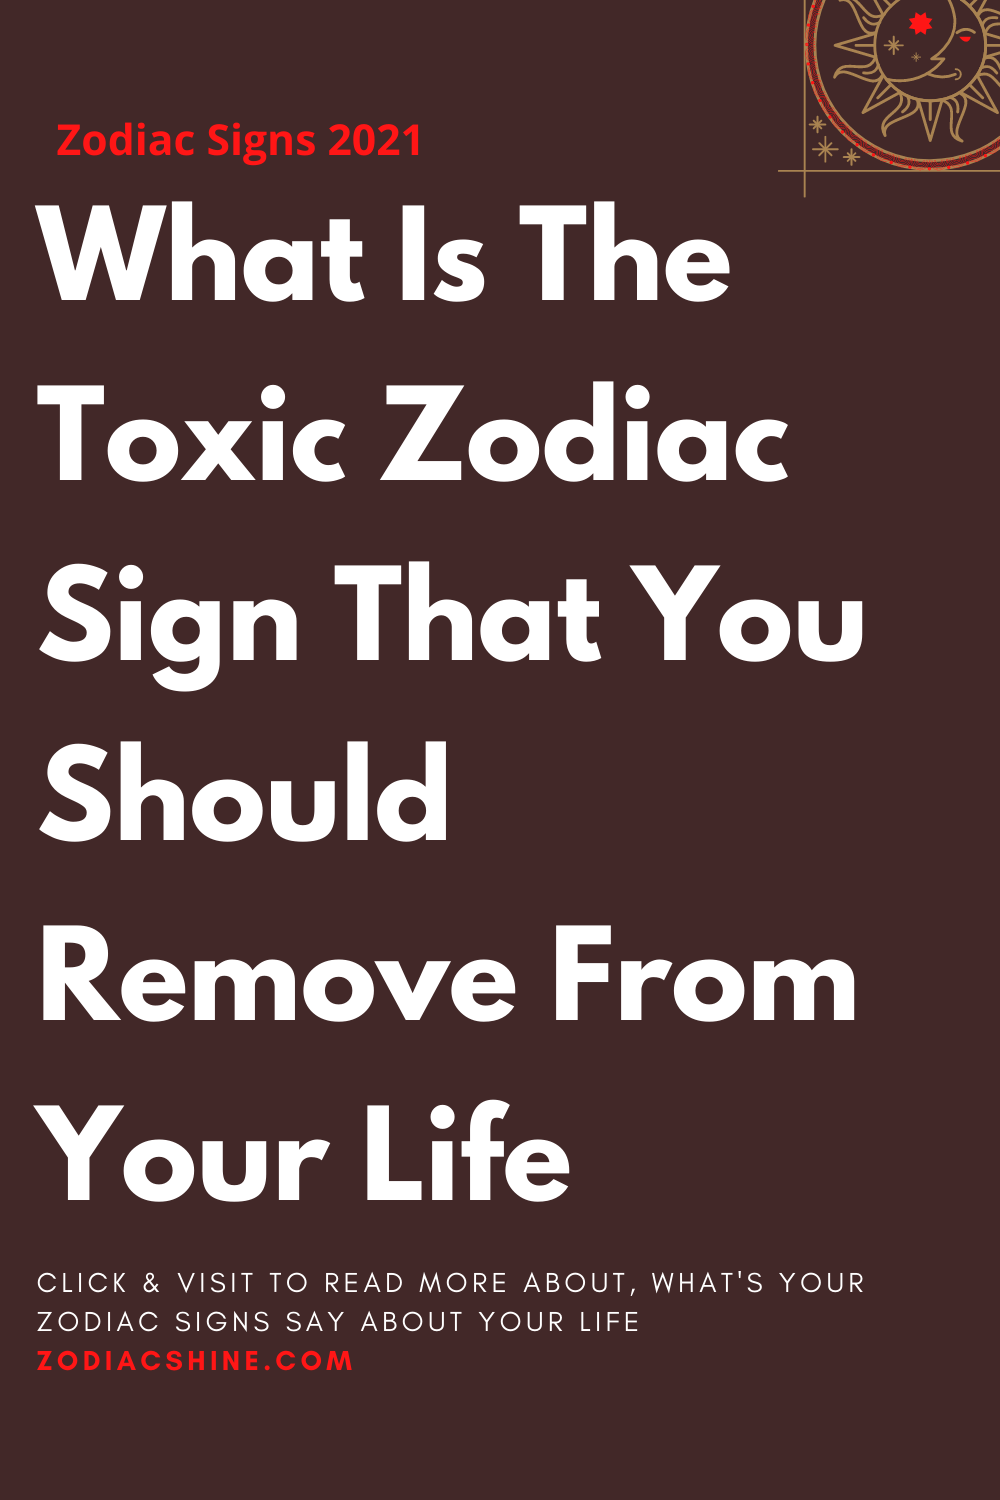 What Is The Toxic Zodiac Sign That You Should Remove From Your Life